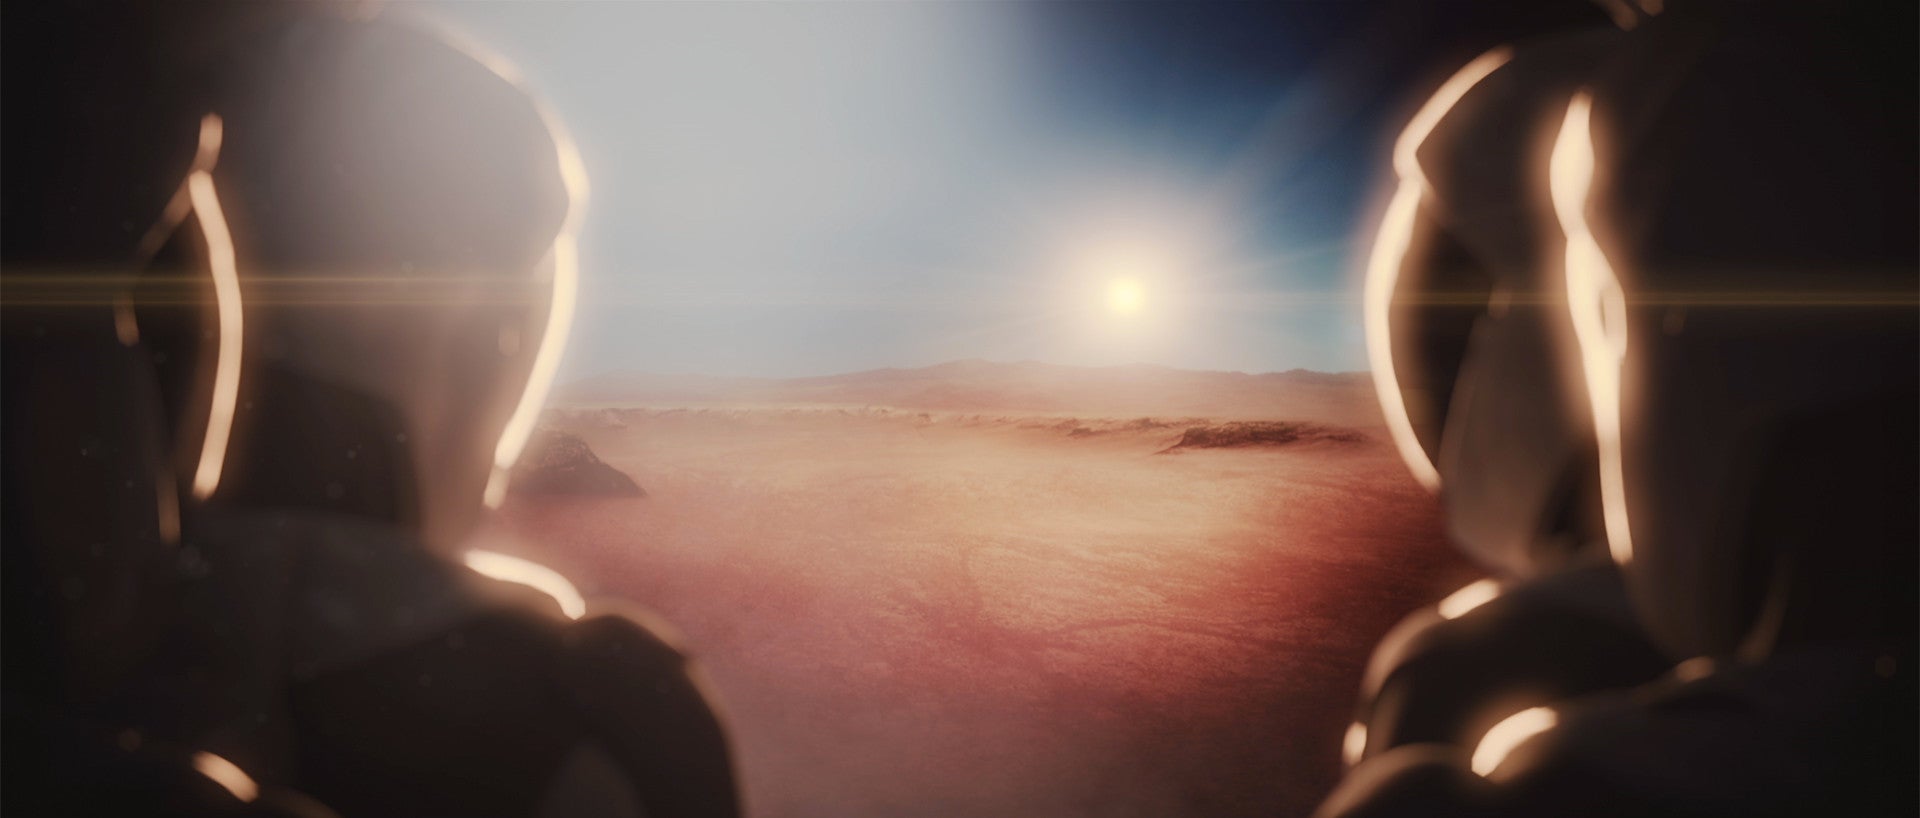 Conceptual image showing humans on the Martian surface.  (Image: SpaceX)